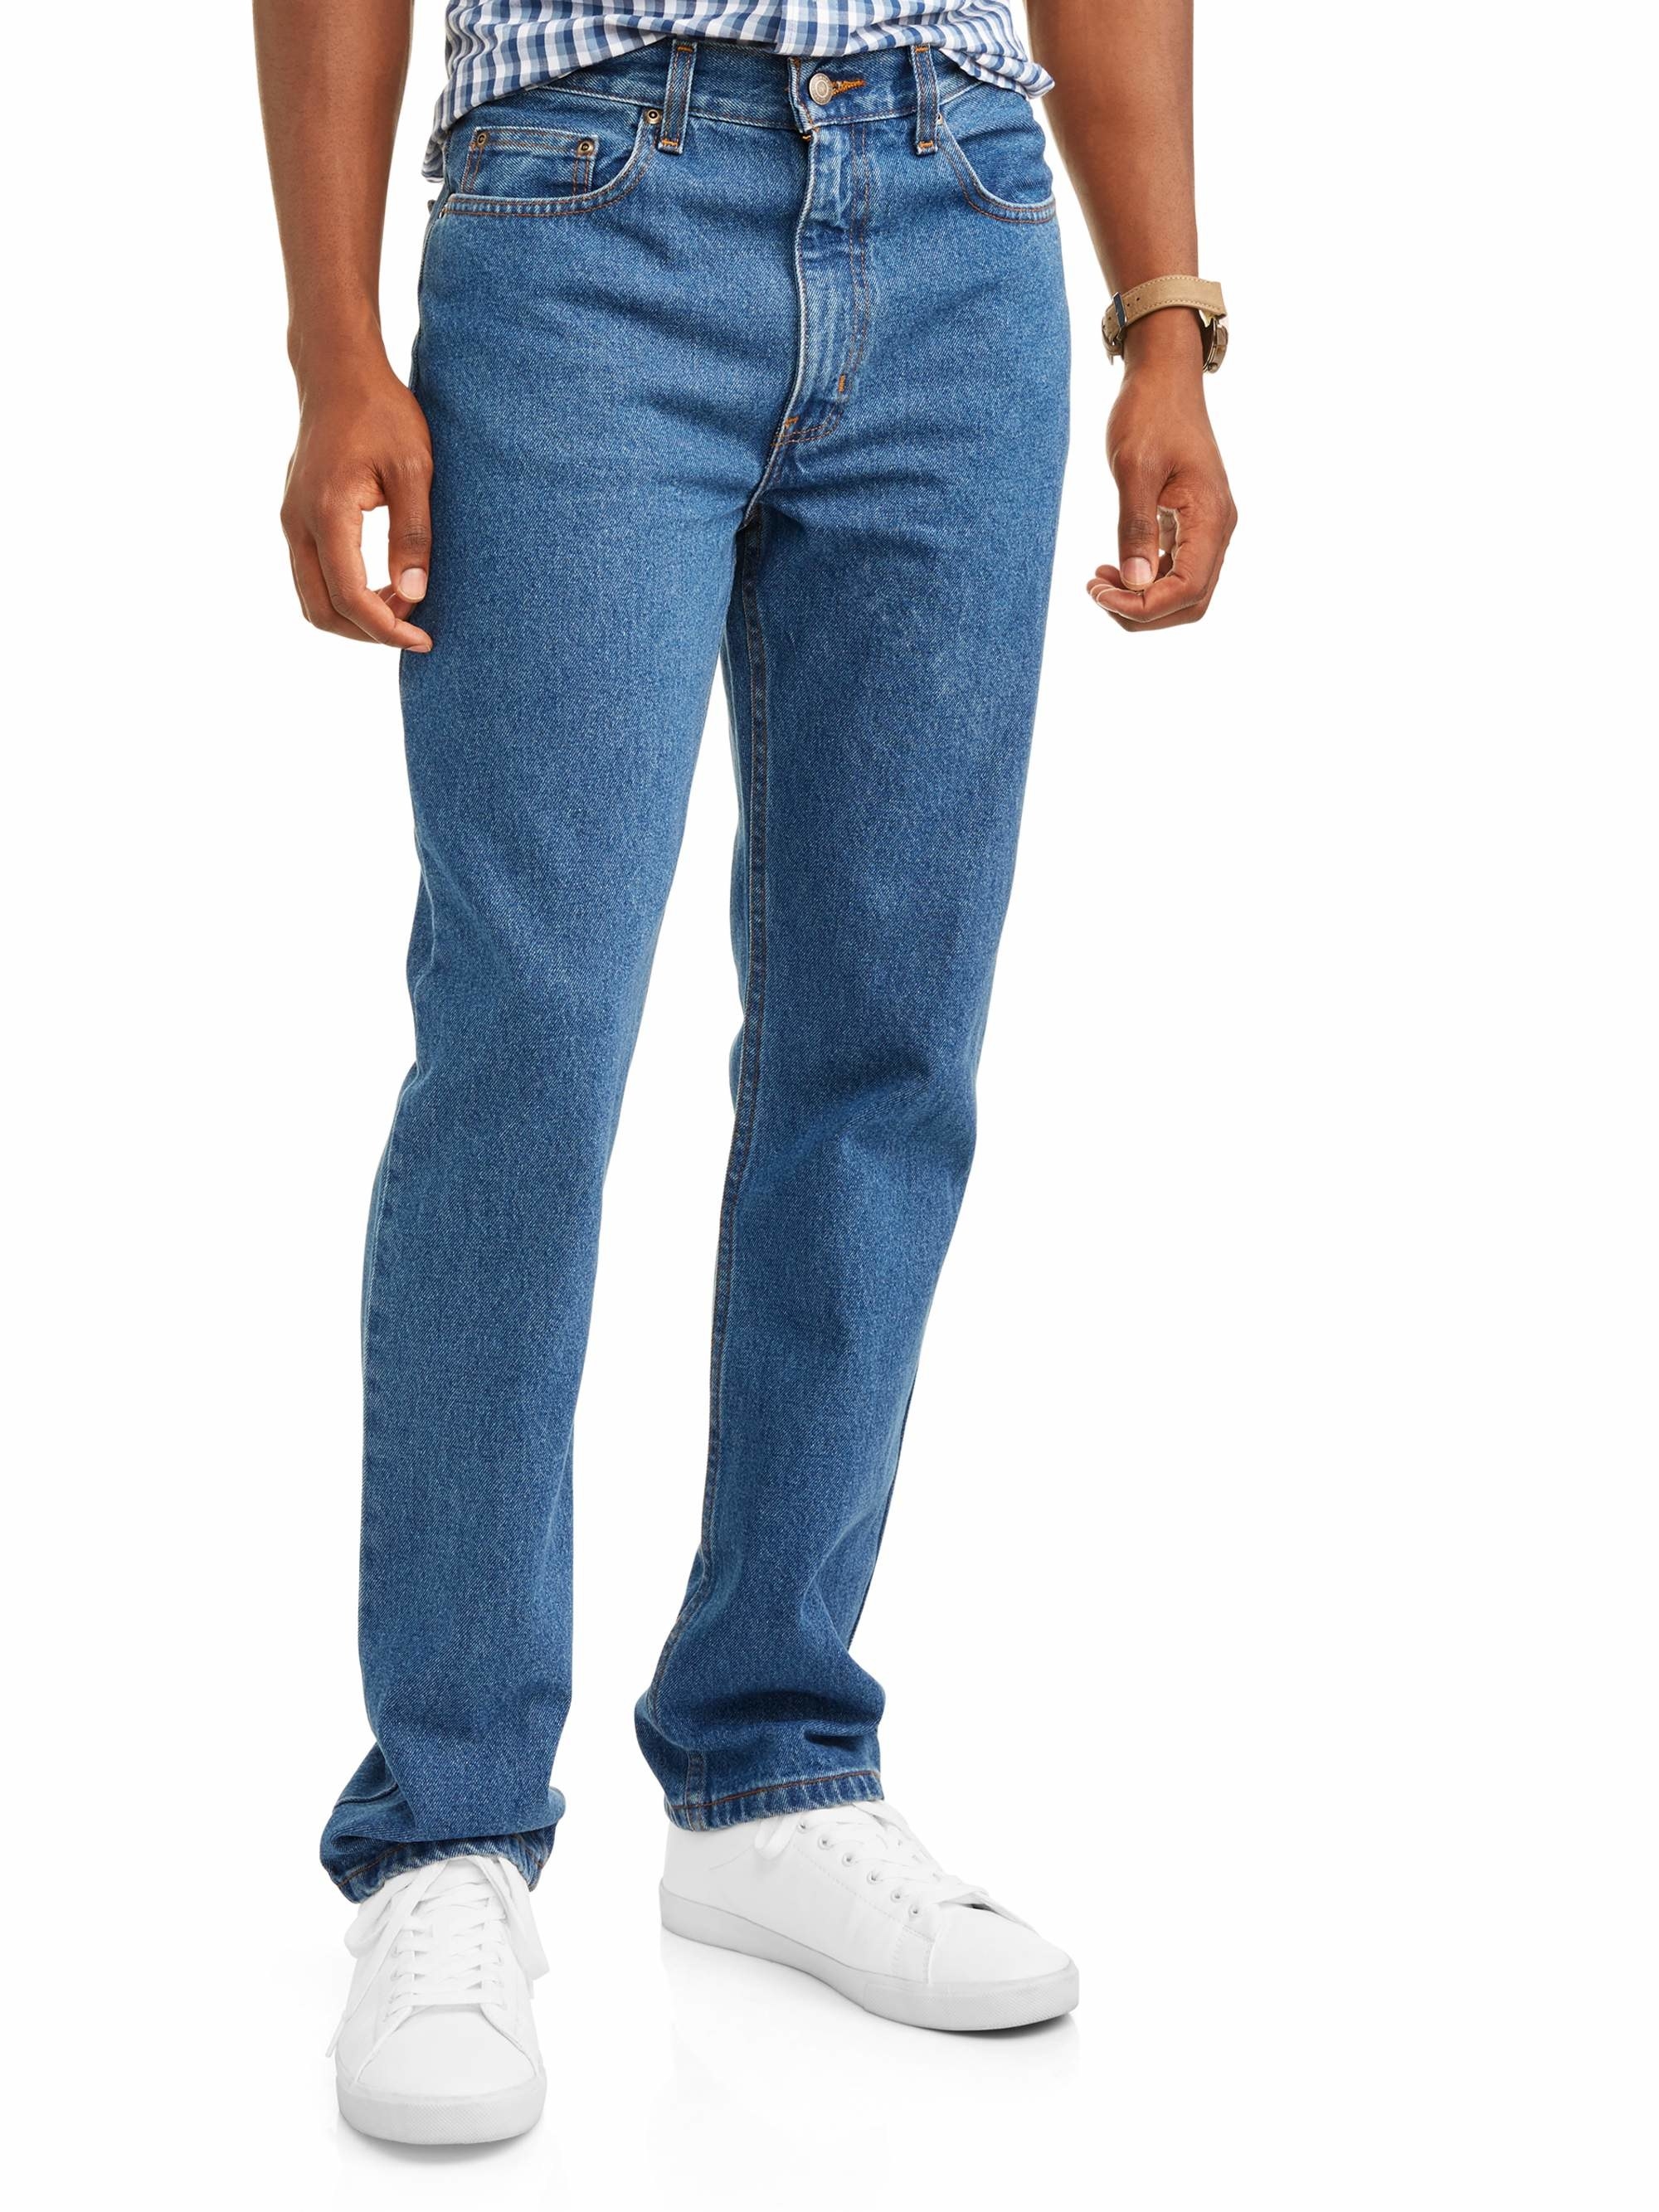 An image of a model wearing a pair of a regular fit jeans made with 100 percent durable cotton